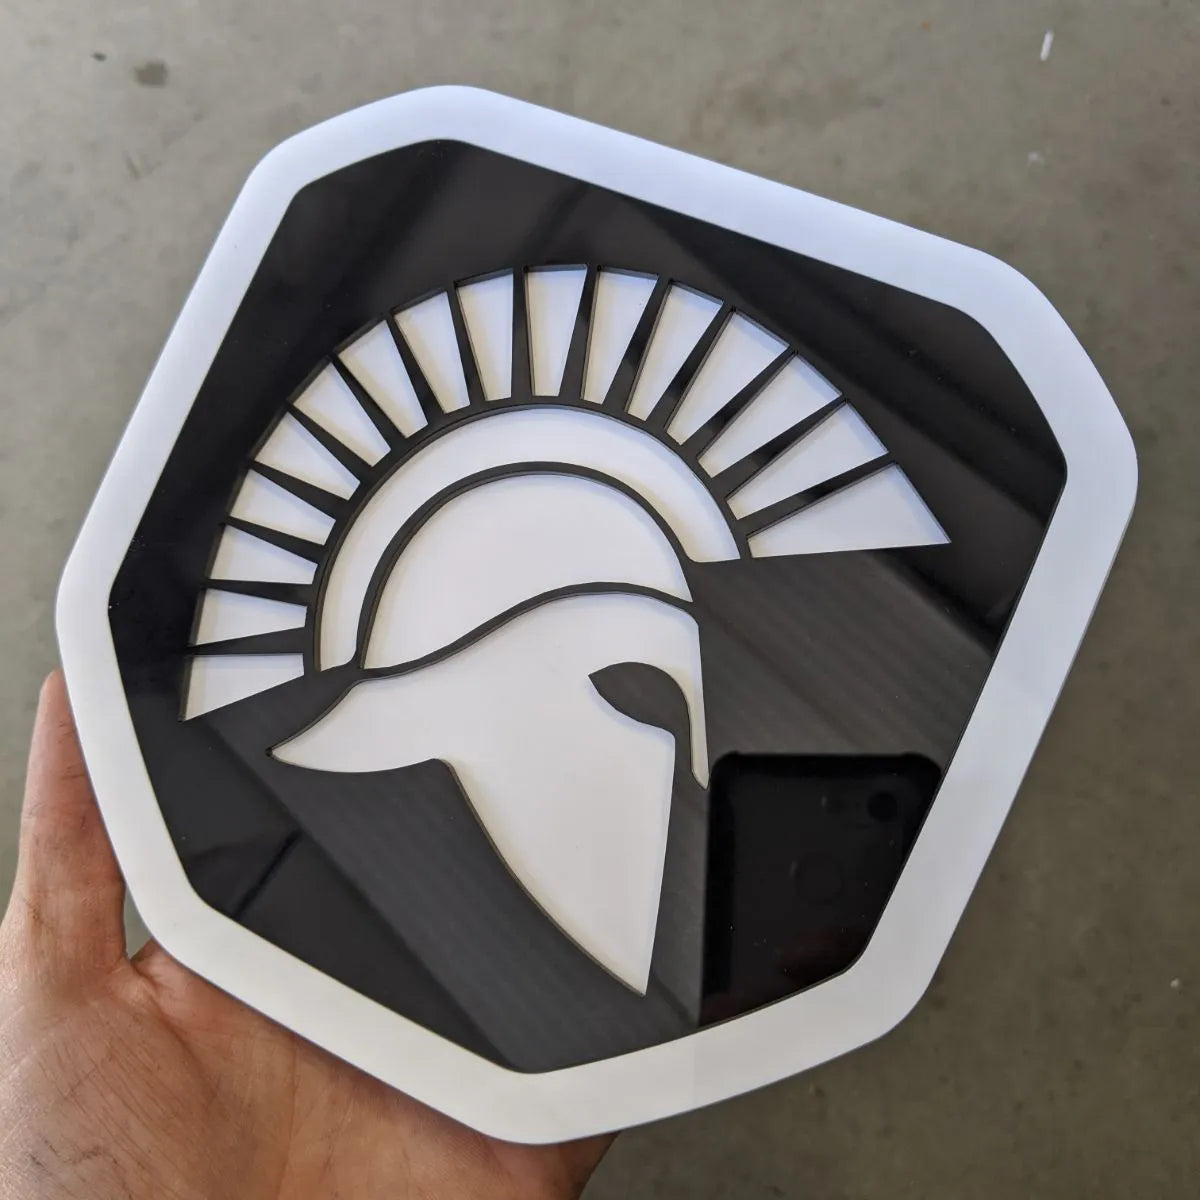 Spartan Badge - Fits 2019+ (5th Gen) Dodge® Ram® Tailgate -1500, 2500, 3500 - White and Black